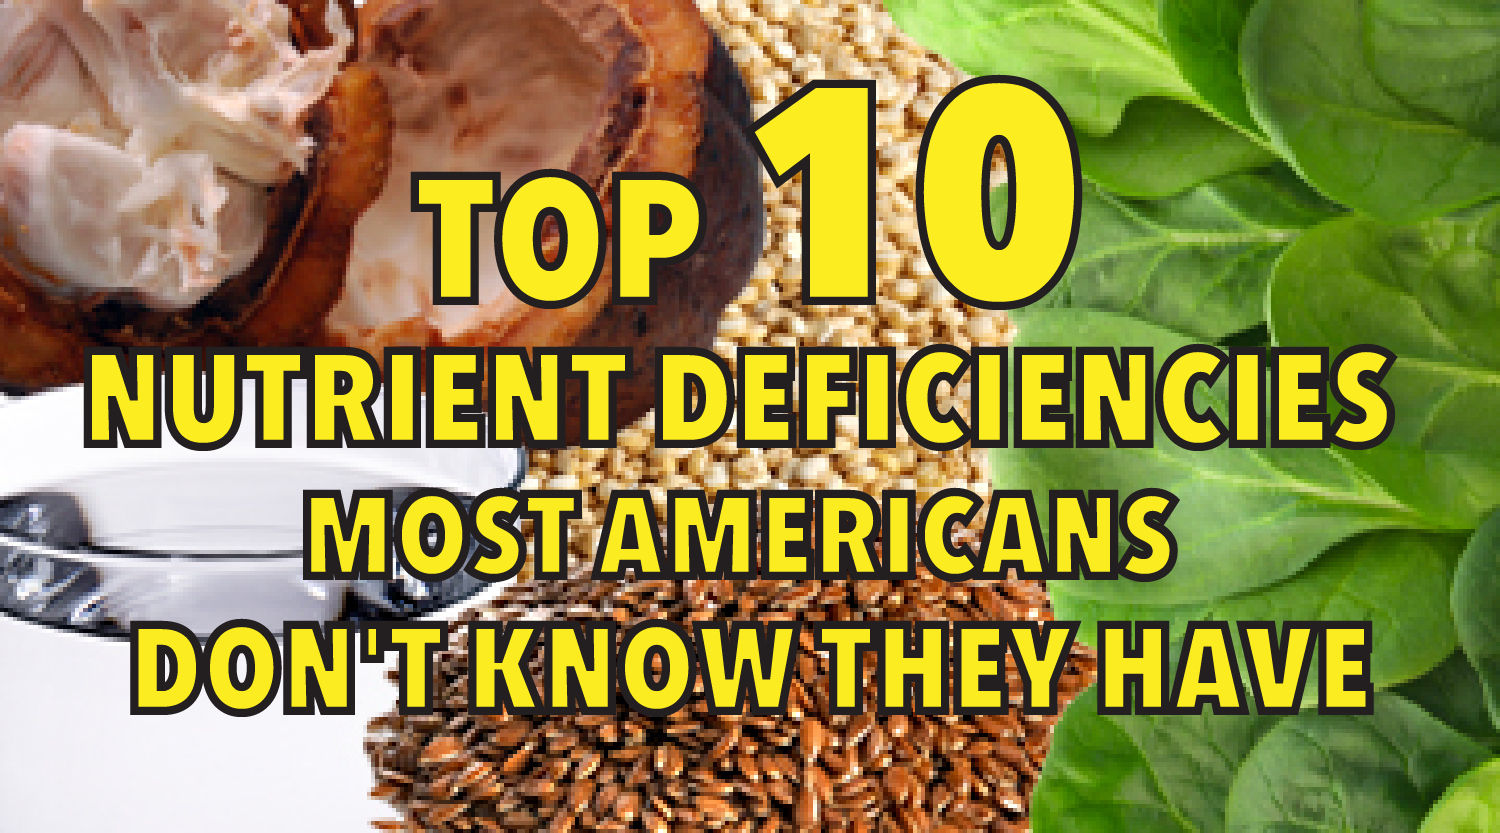 Top 10 nutrient deficiencies most Americans don't know they have